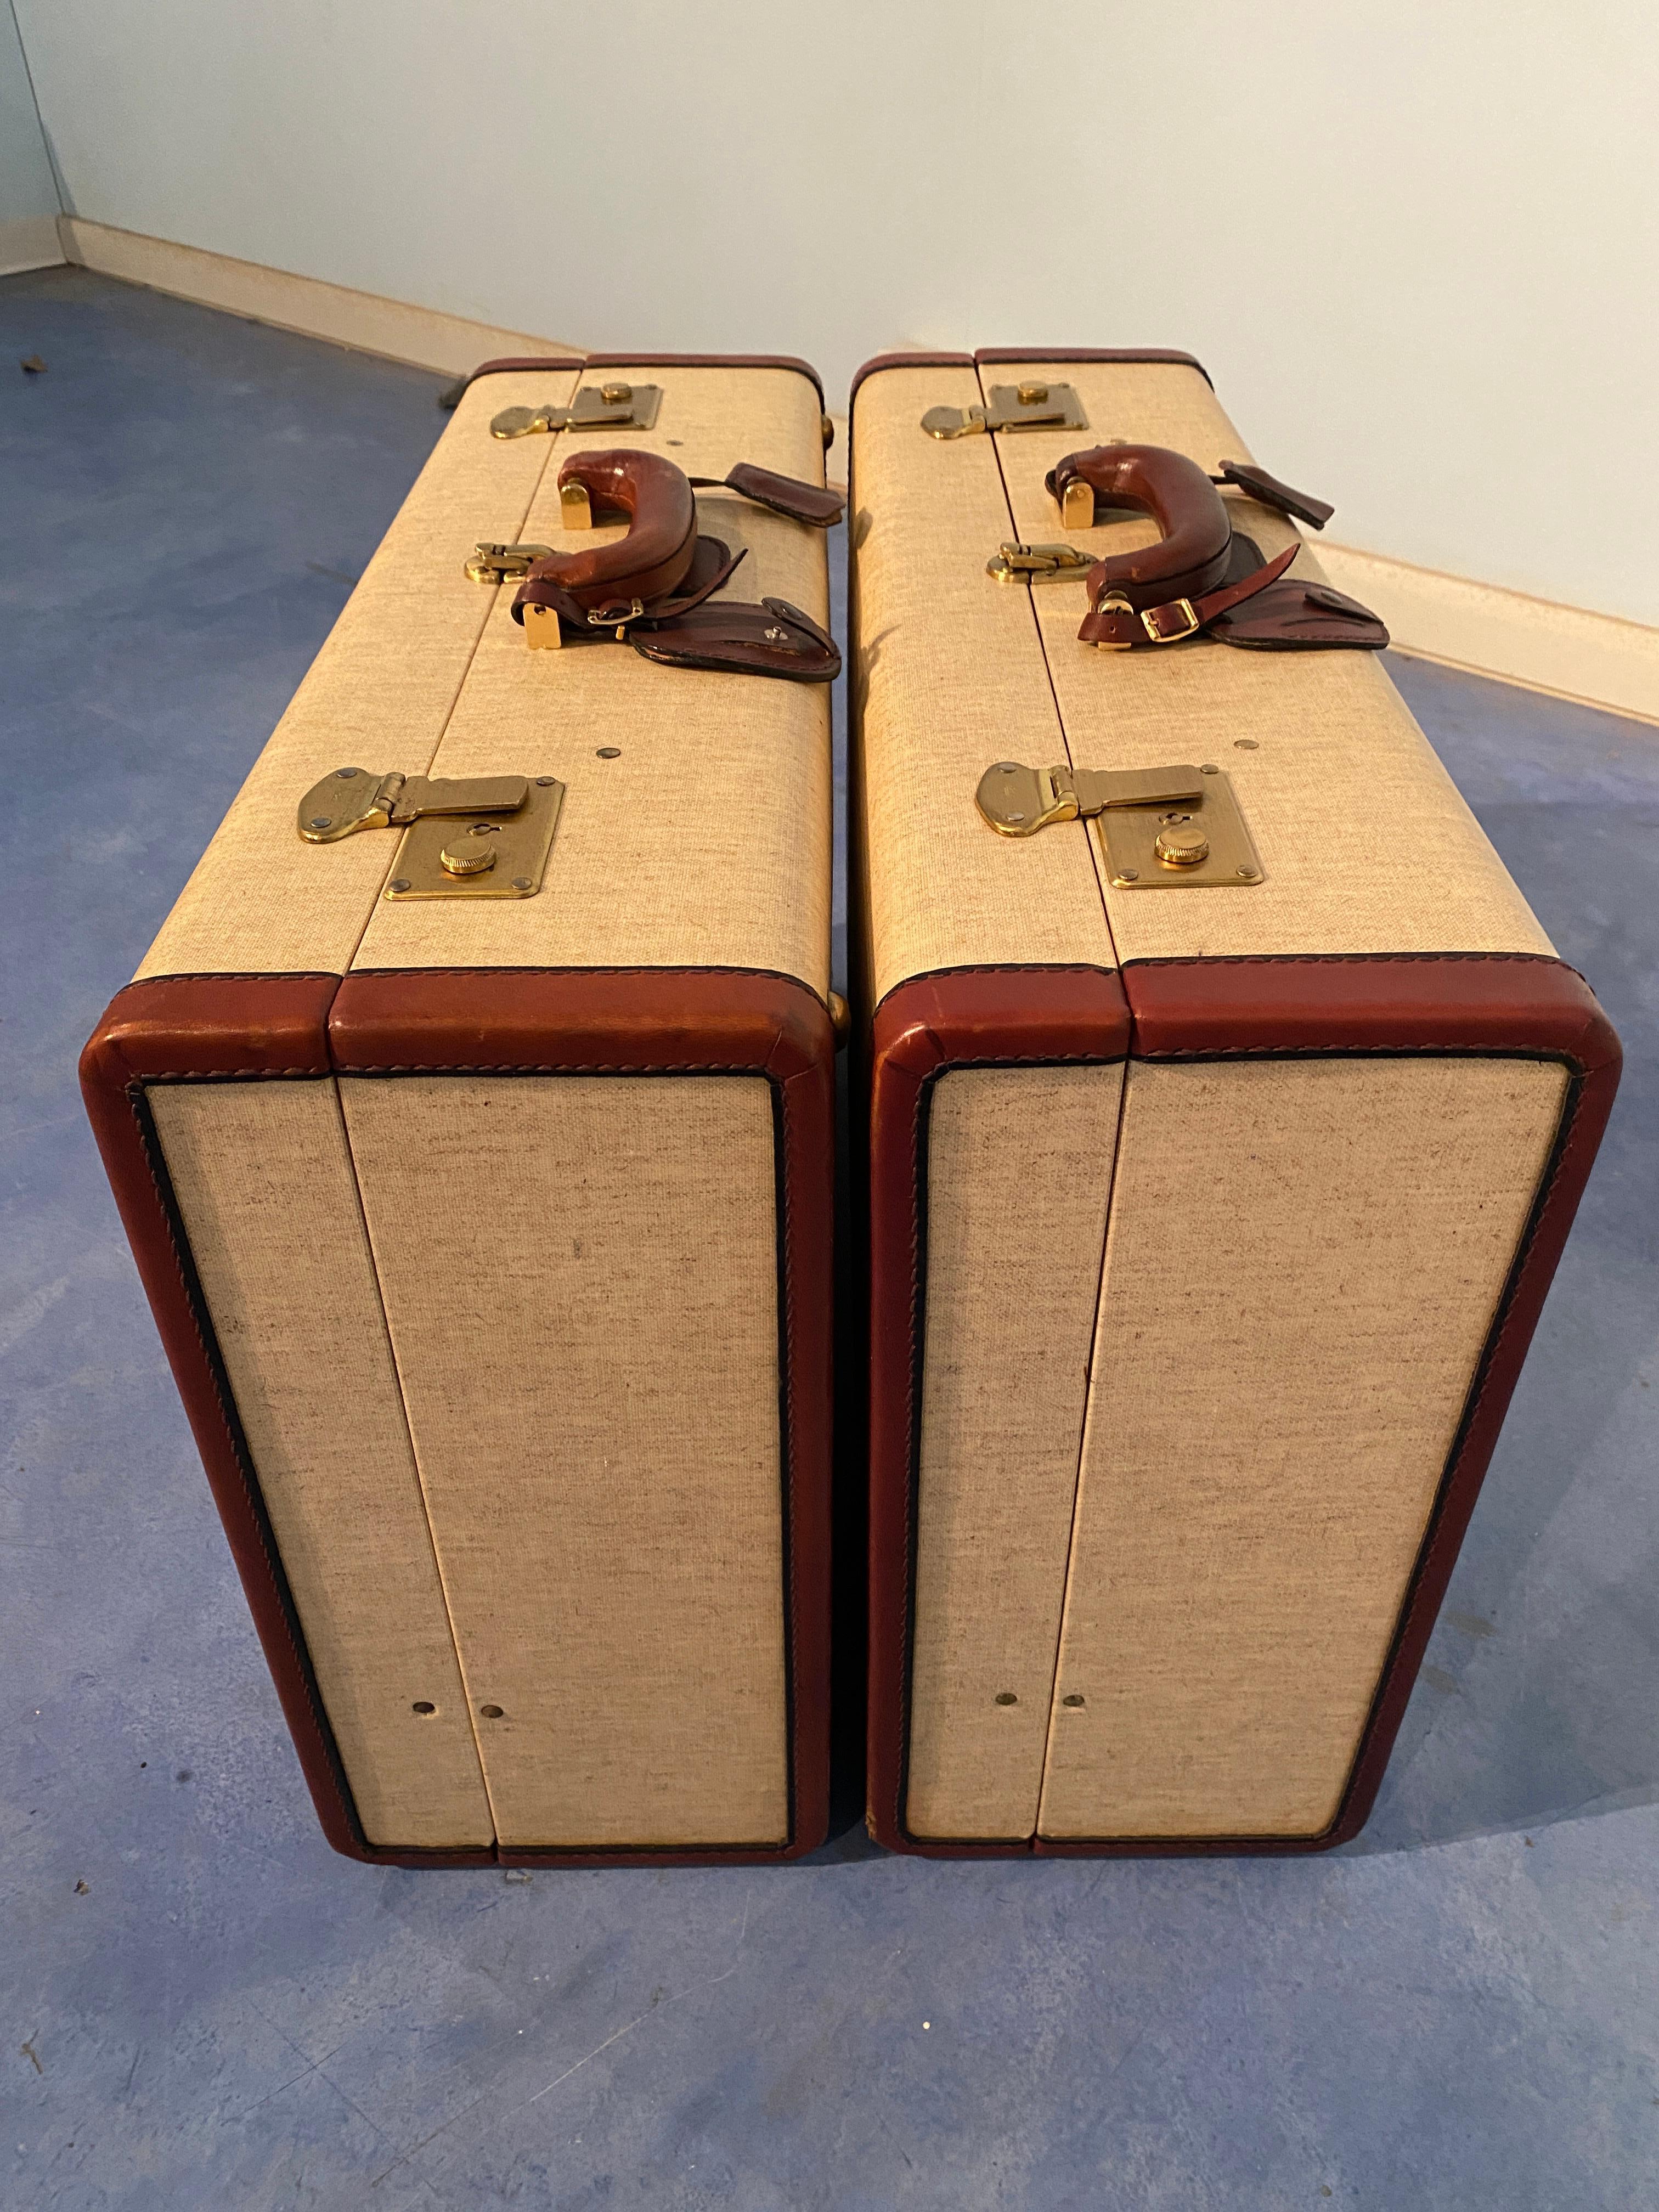 Italian Mid-Century Moder Luggages or Suitcases Mèlange Color, Set of Two, 1960 For Sale 11